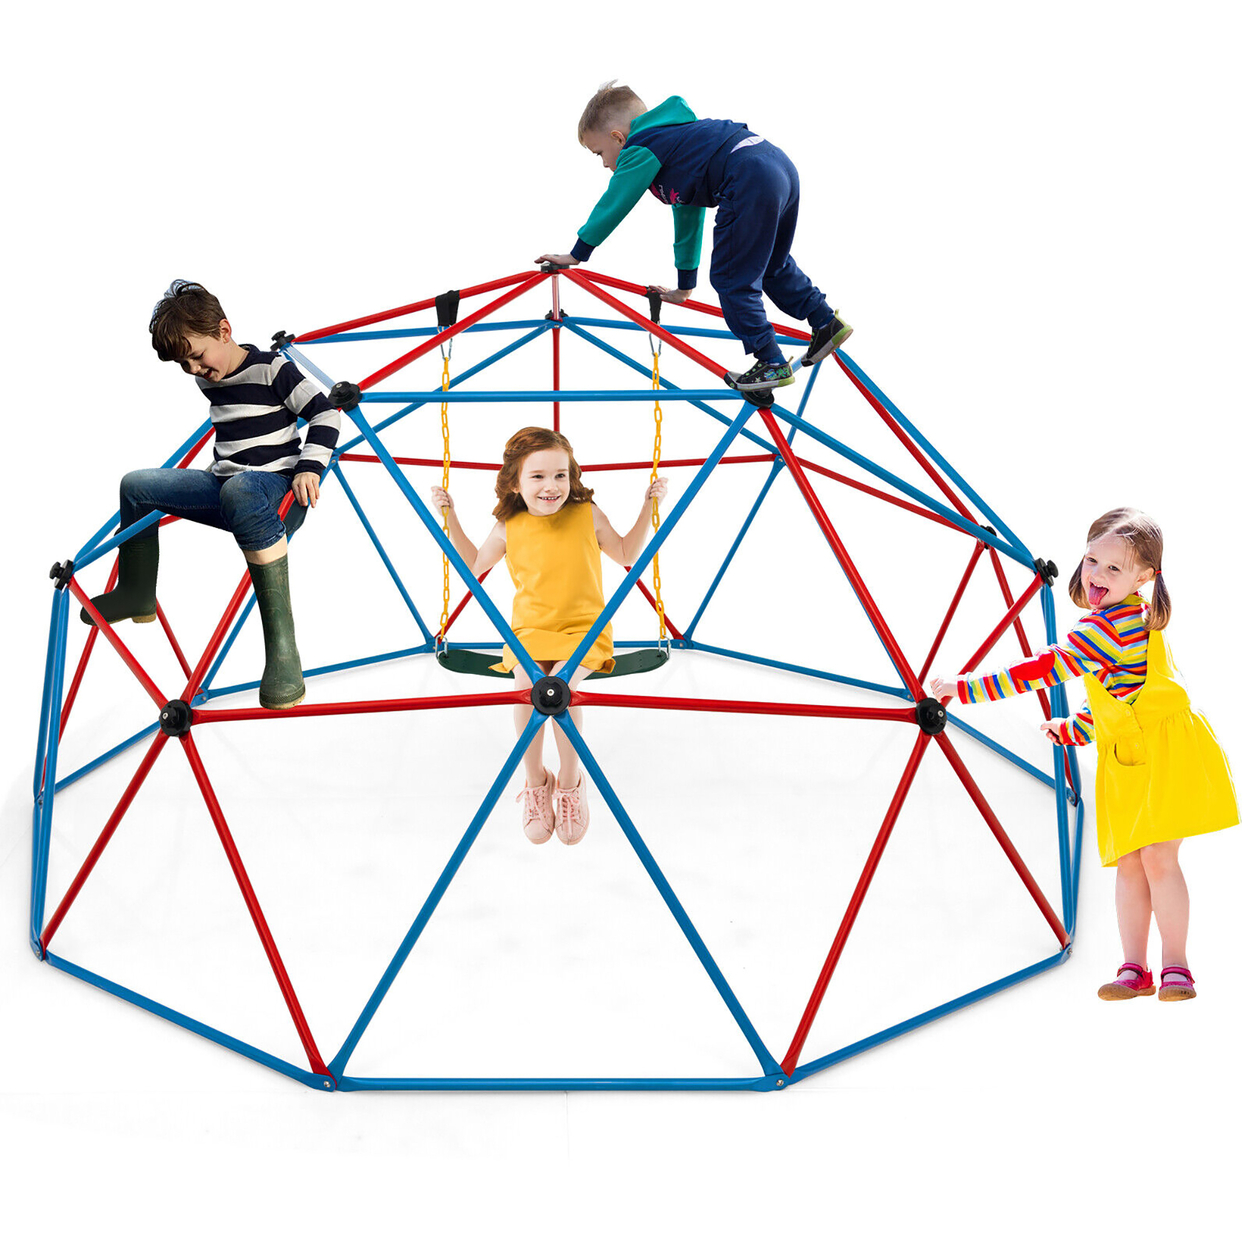 10 FT Climbing Dome With Swing Outdoor Kids Play Jungle Gym Red And Blue